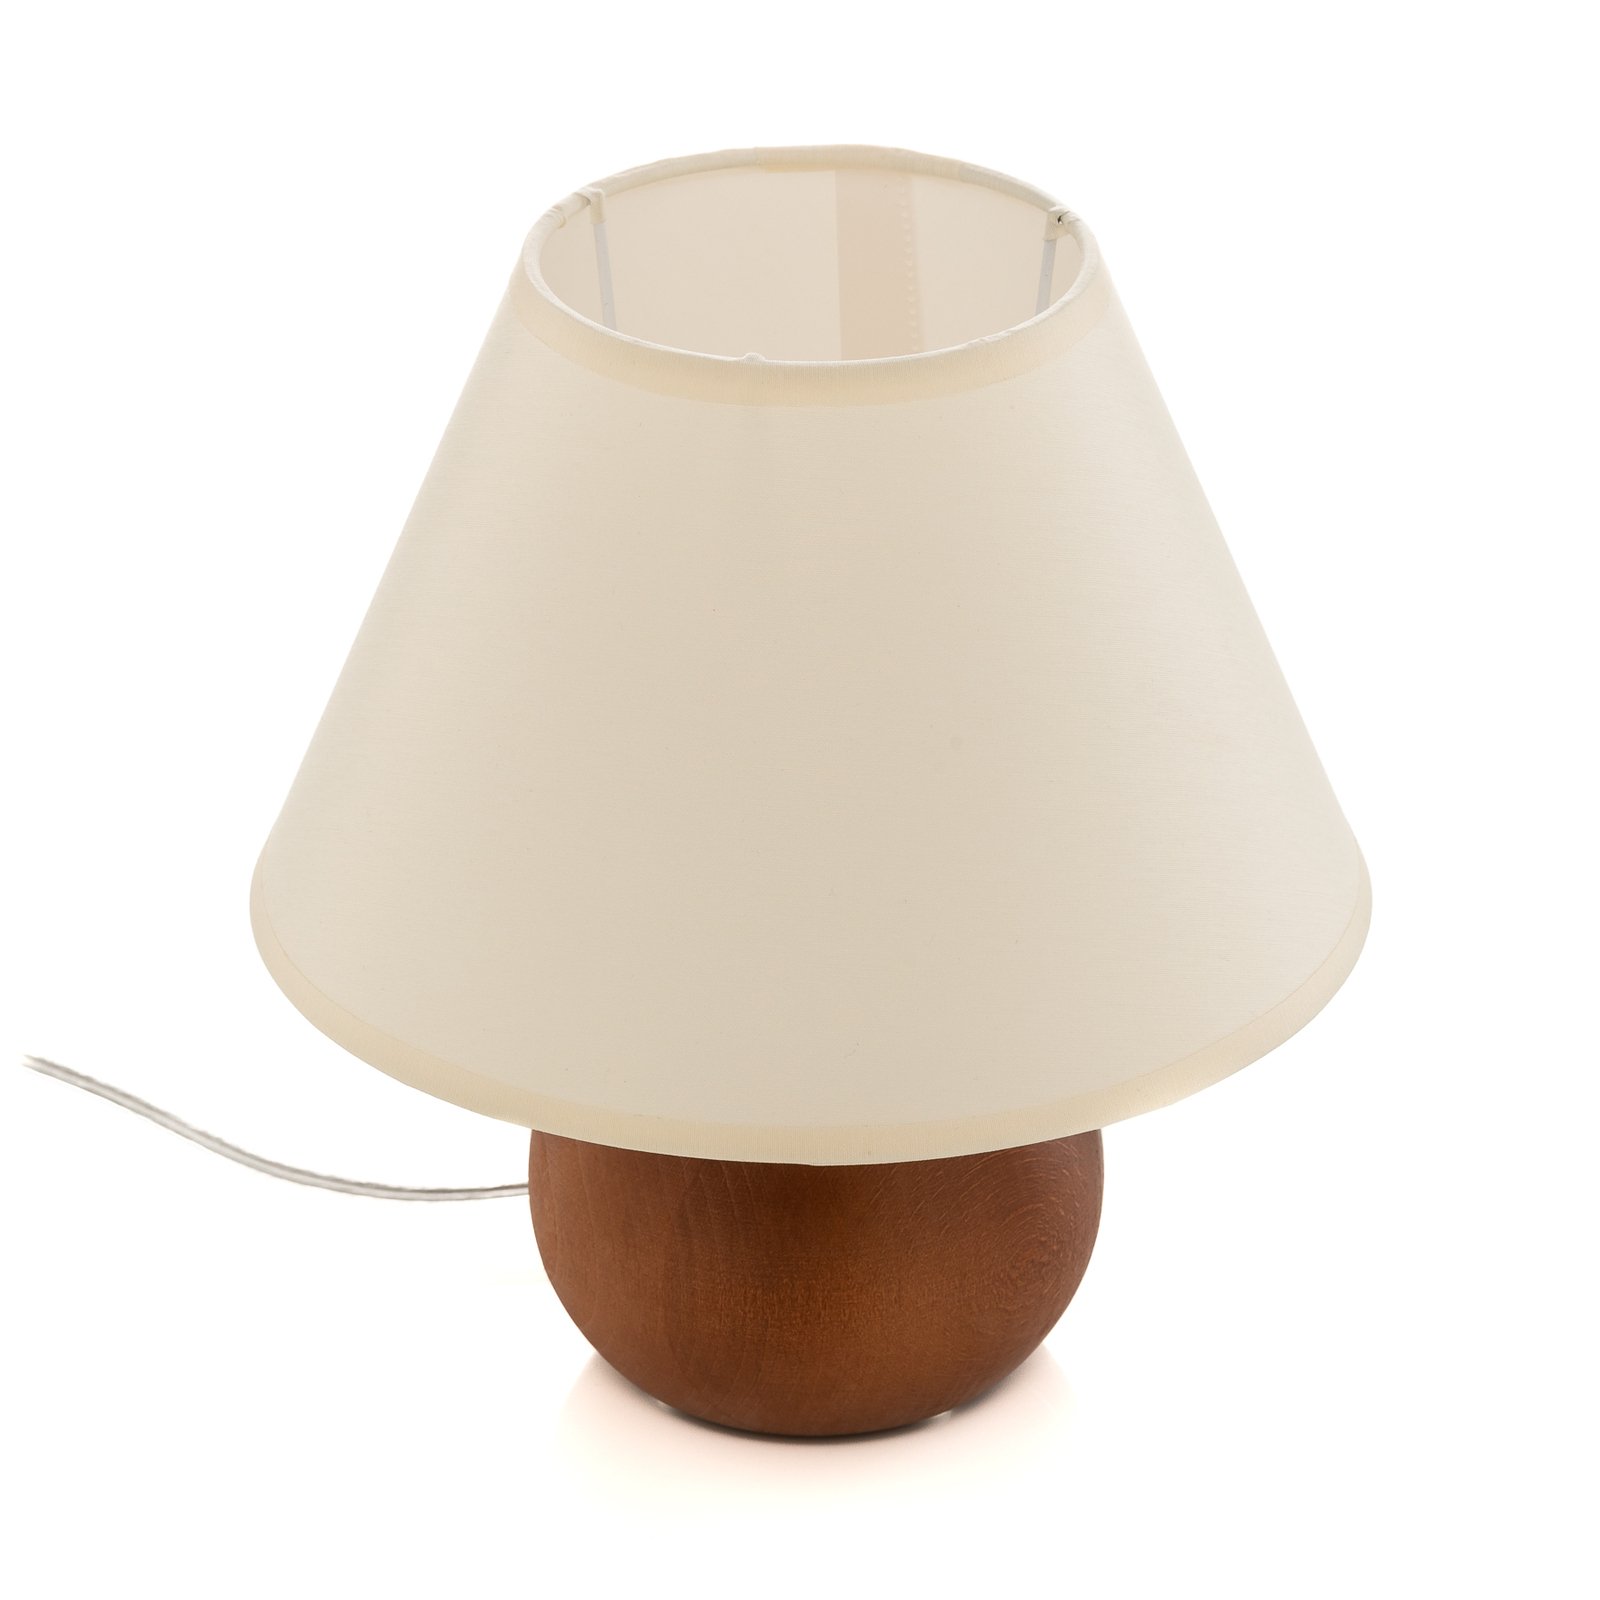 Gill table lamp, rustic wood/ white lampshade